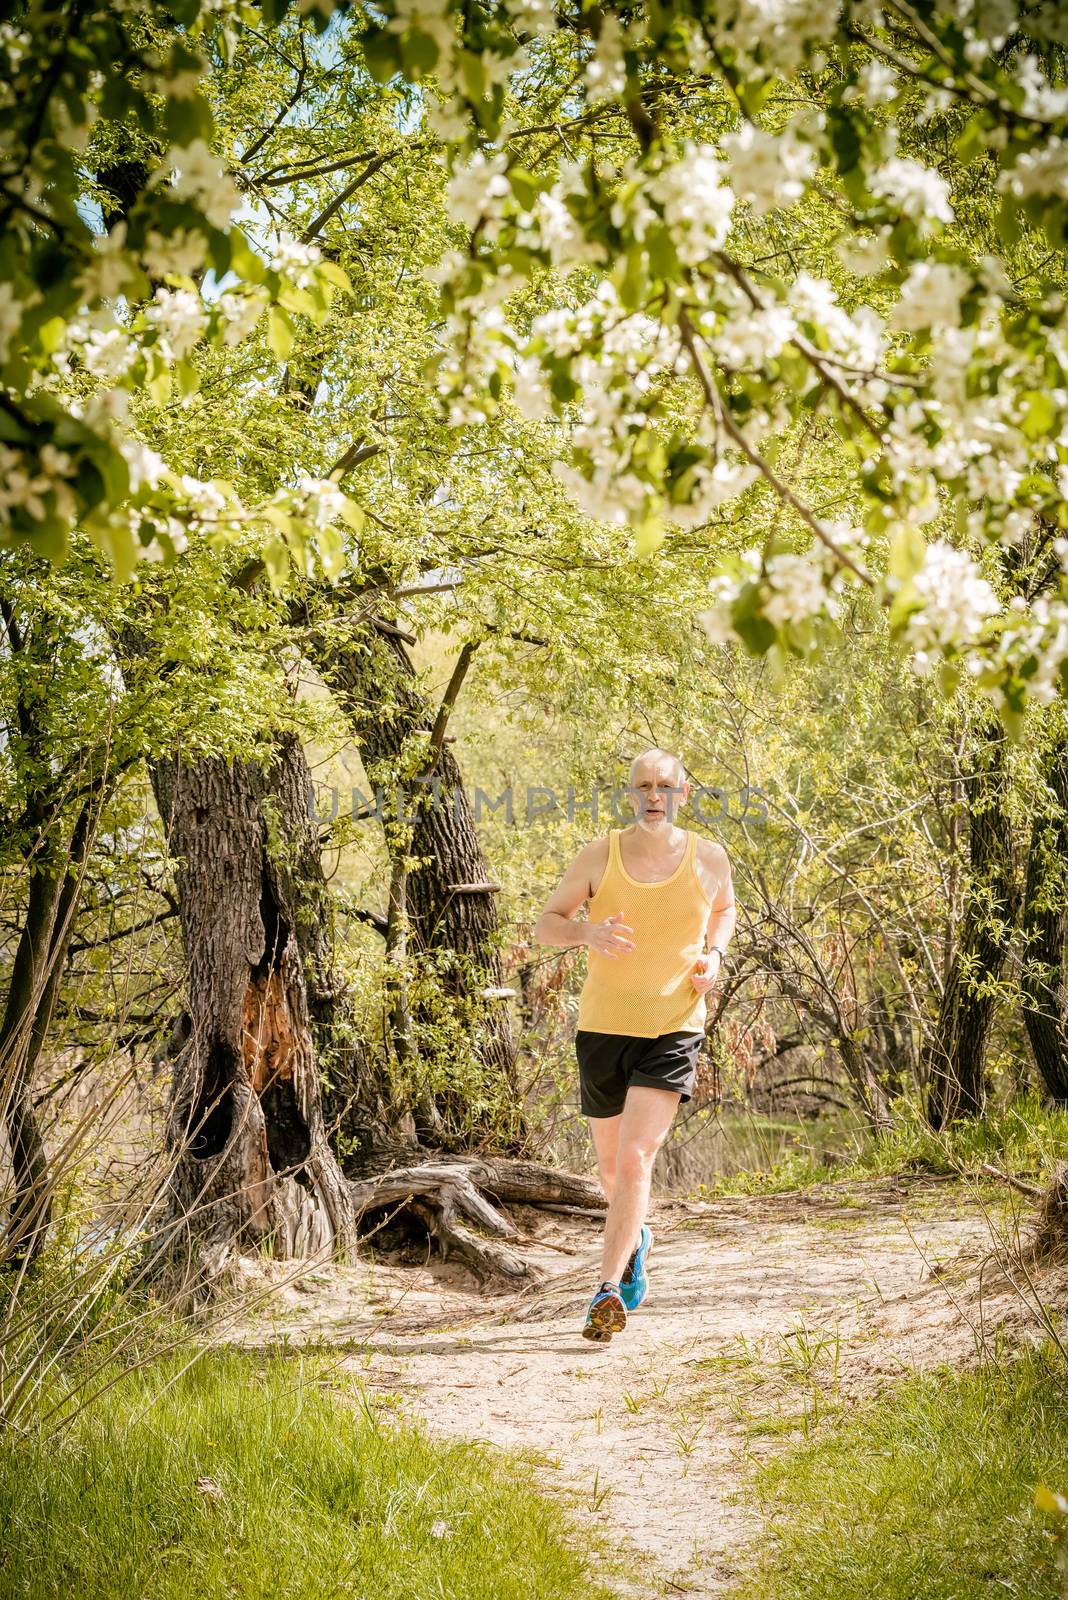 A senior man dressed in black and yellow is running in the forest, close to the lake, under an apple blossom, during a warm spring day